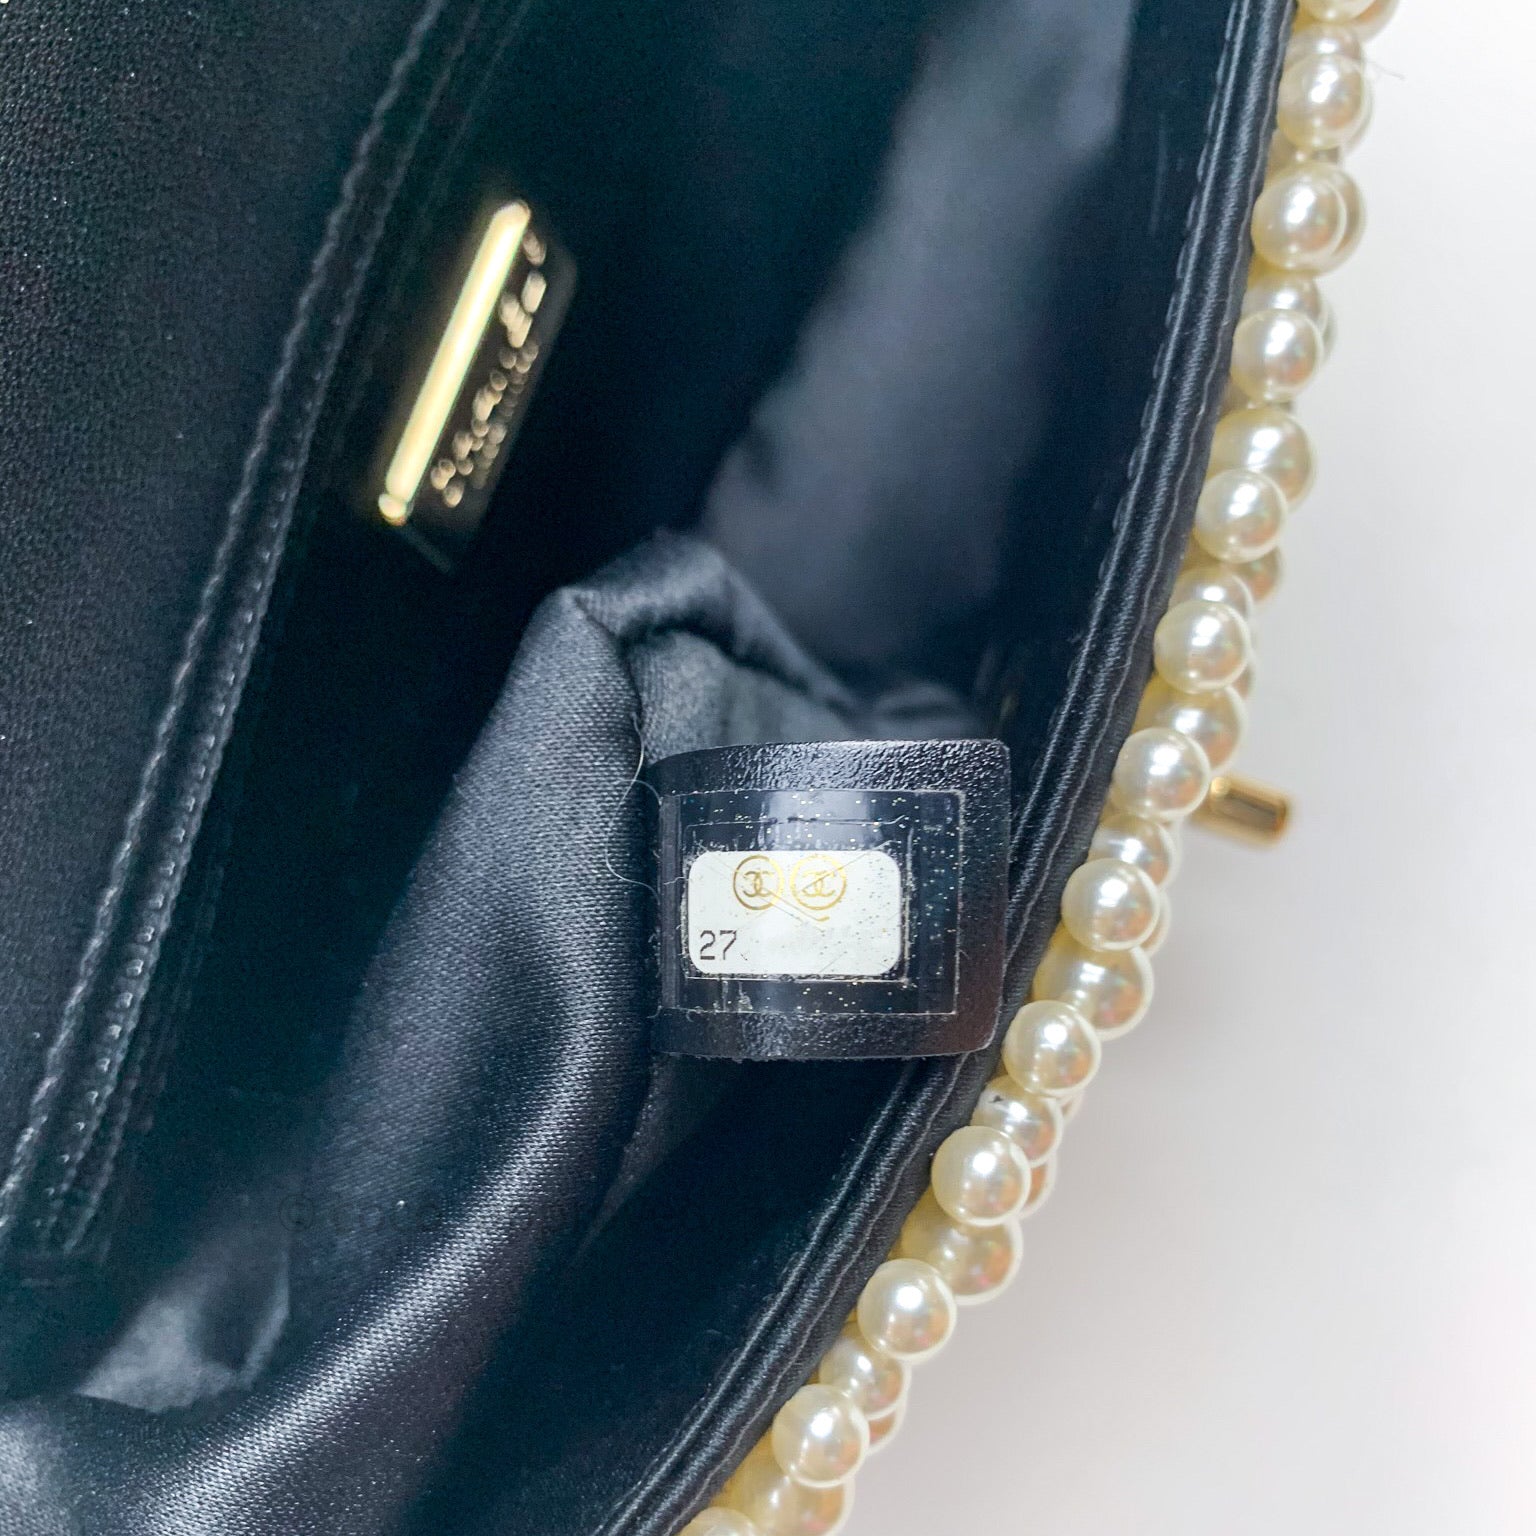 CHANEL 19S Runway 'Coco Sand' Bag with Pearls *New - Timeless Luxuries